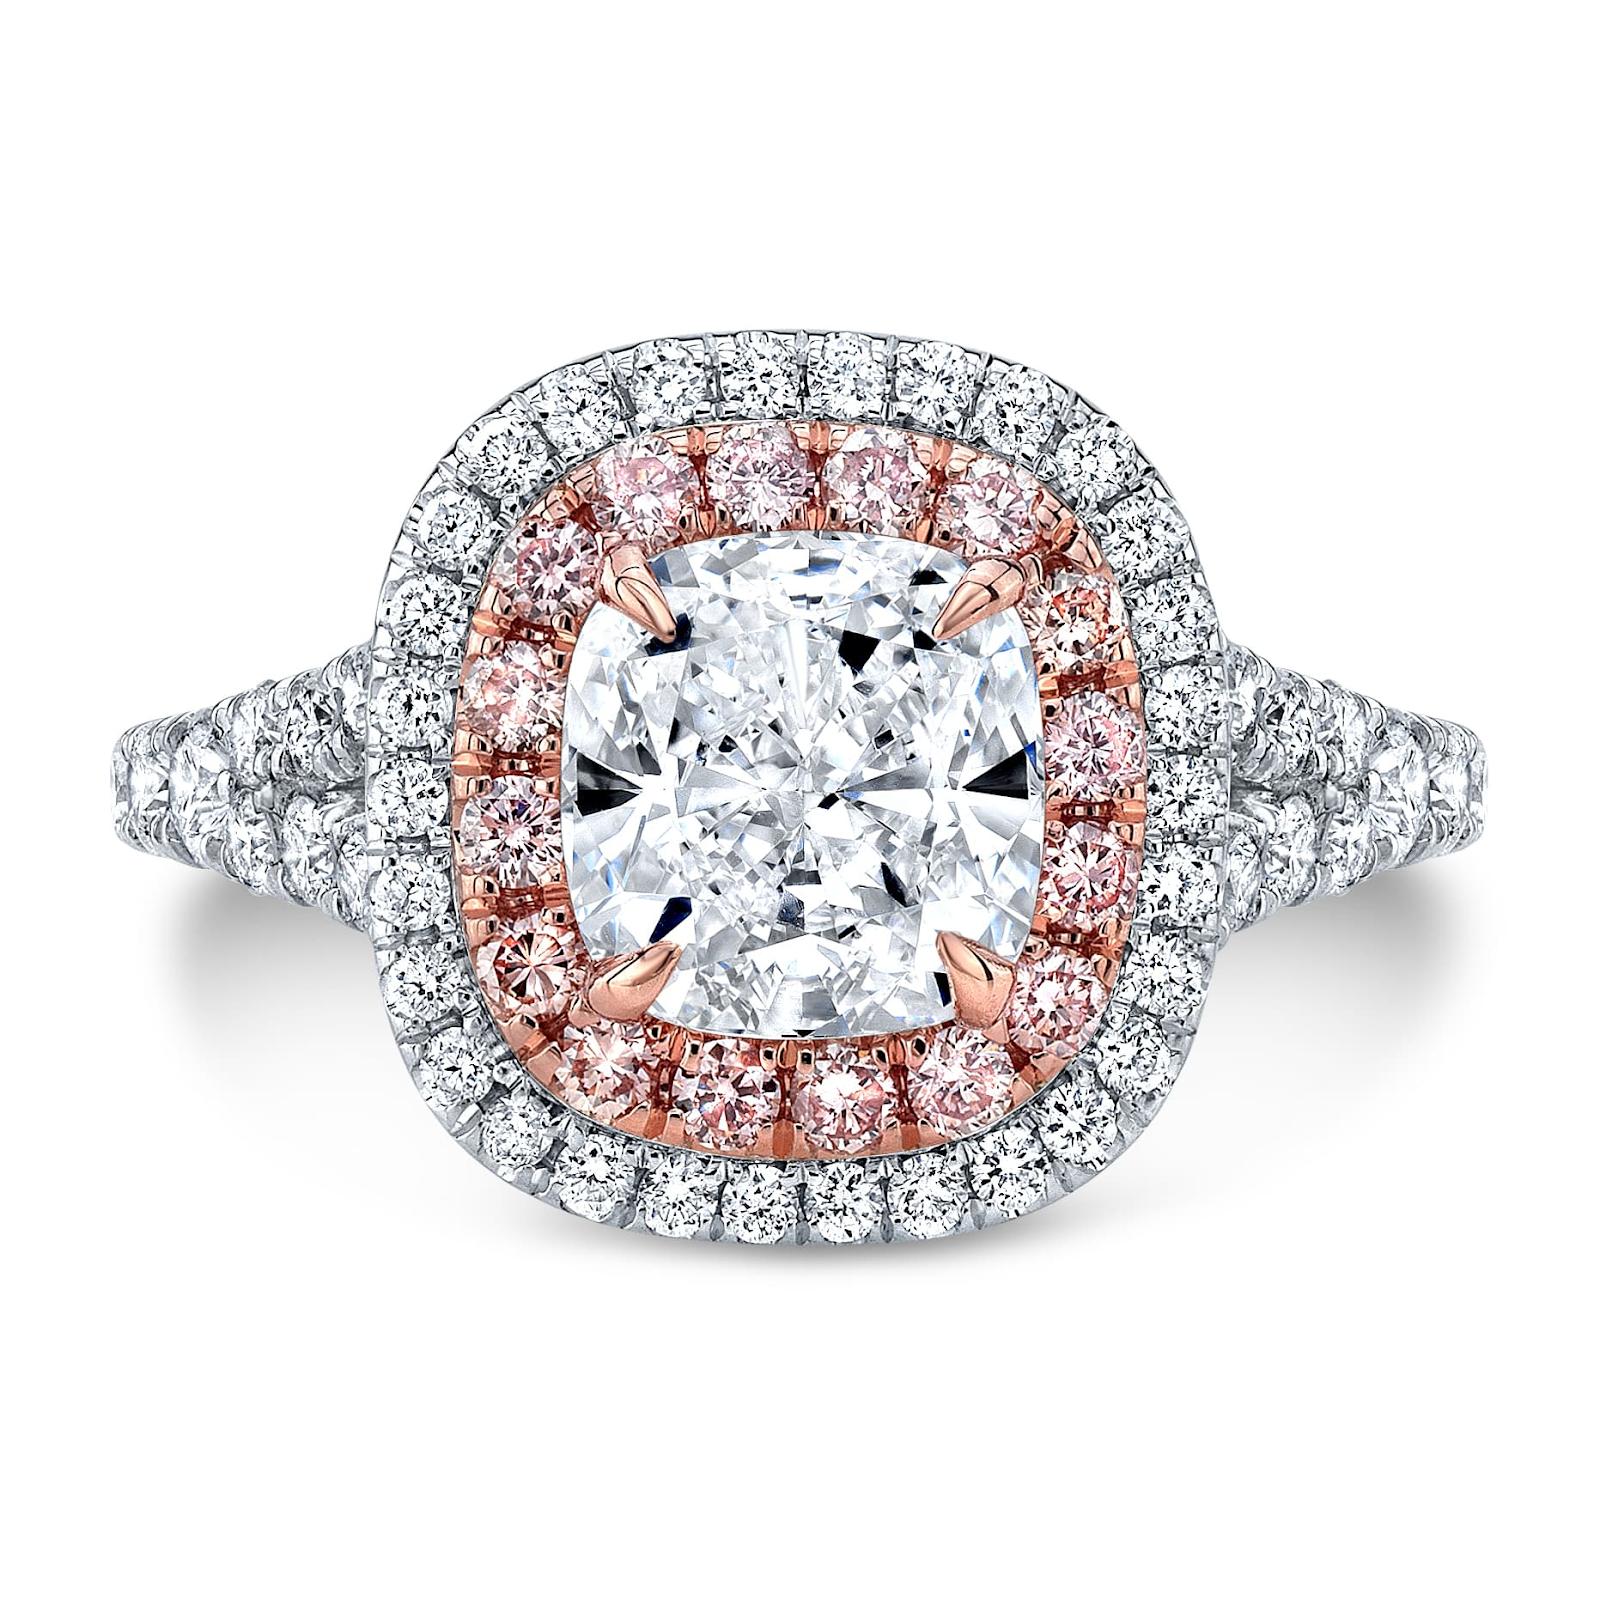 Big Expensive Engagement Rings | Expensive engagement rings, Best engagement  rings, Pear shaped diamond engagement rings